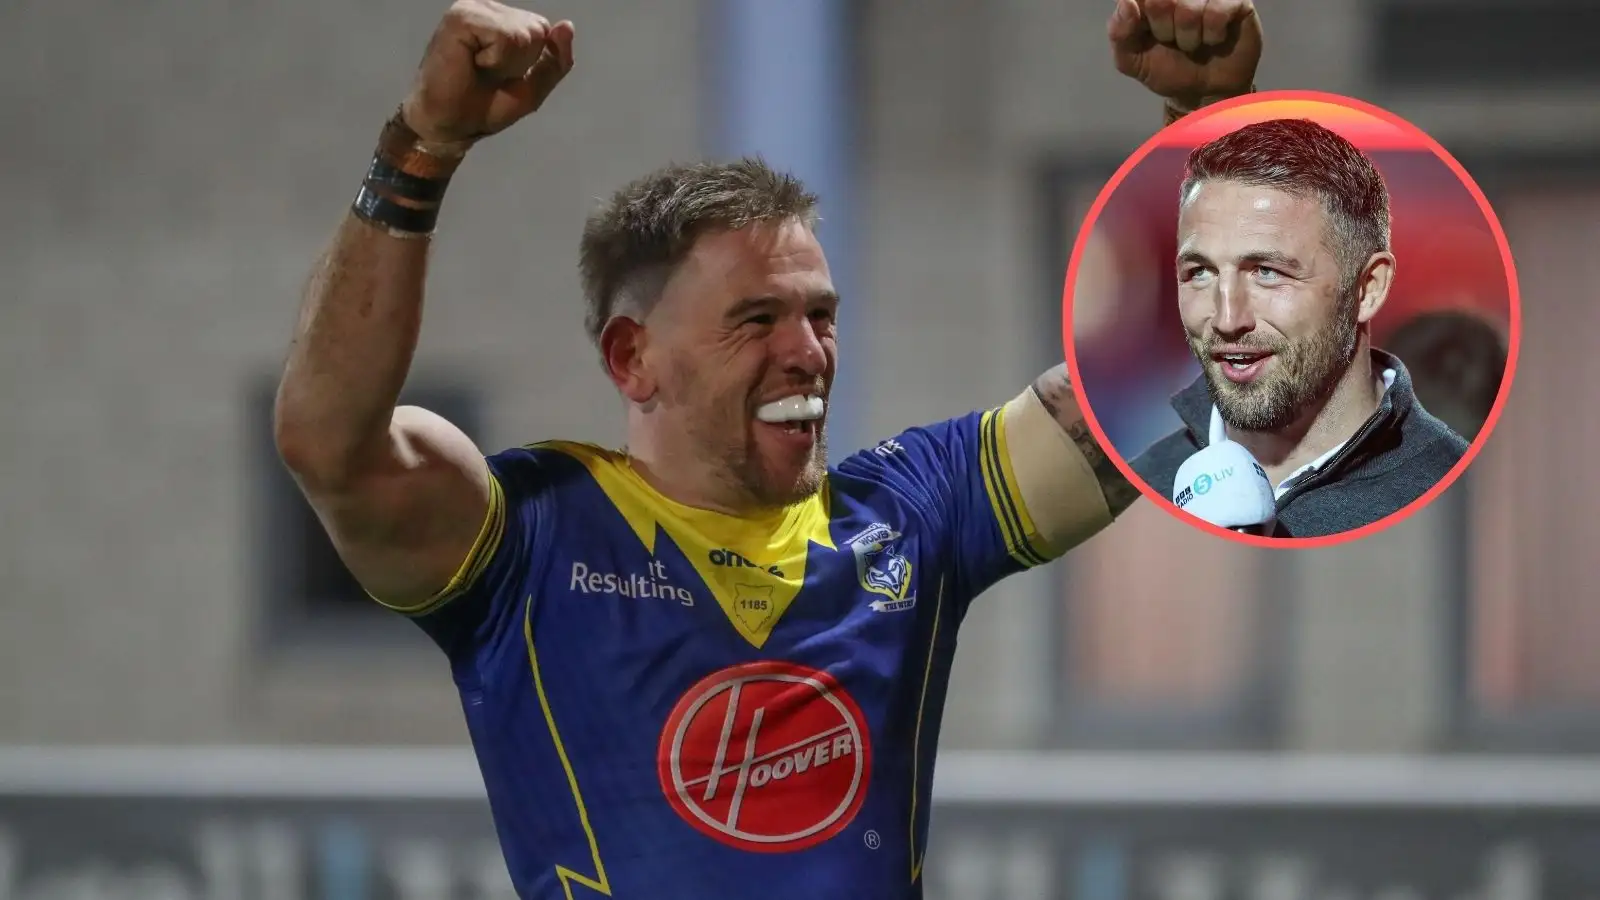 Sam Burgess made up to tie down in-form Warrington Wolves star with ‘genuine X factor’